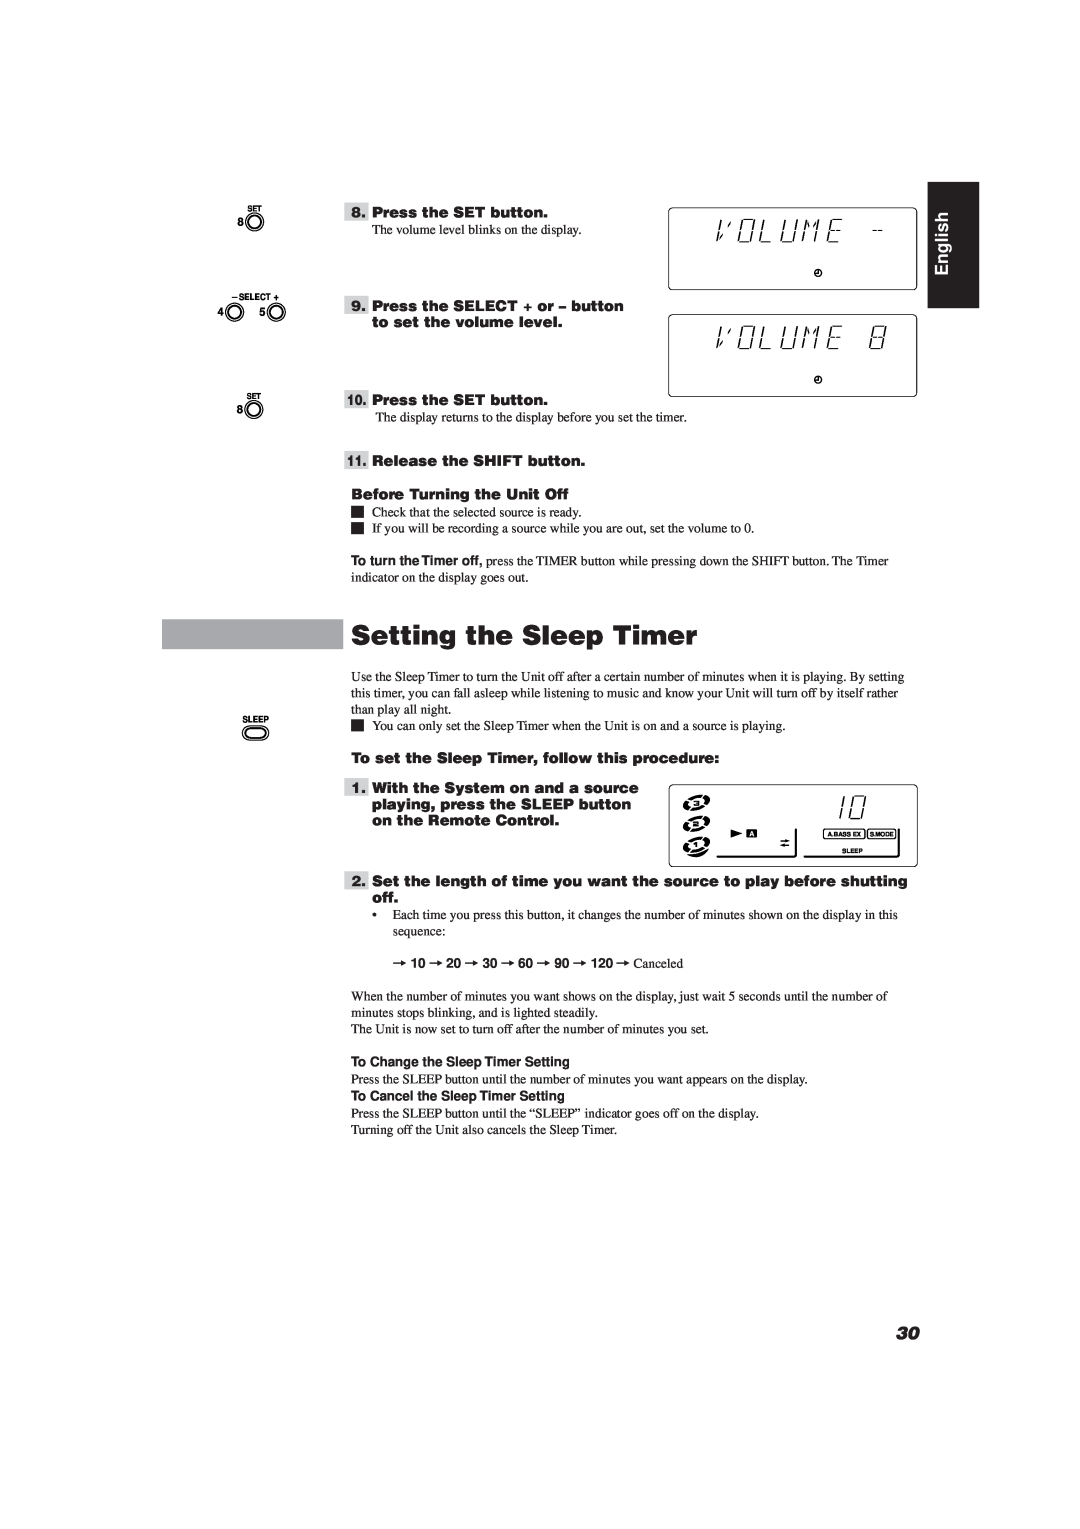 JVC MX-J111V Setting the Sleep Timer, English, Press the SET button, Release the SHIFT button, Before Turning the Unit Off 